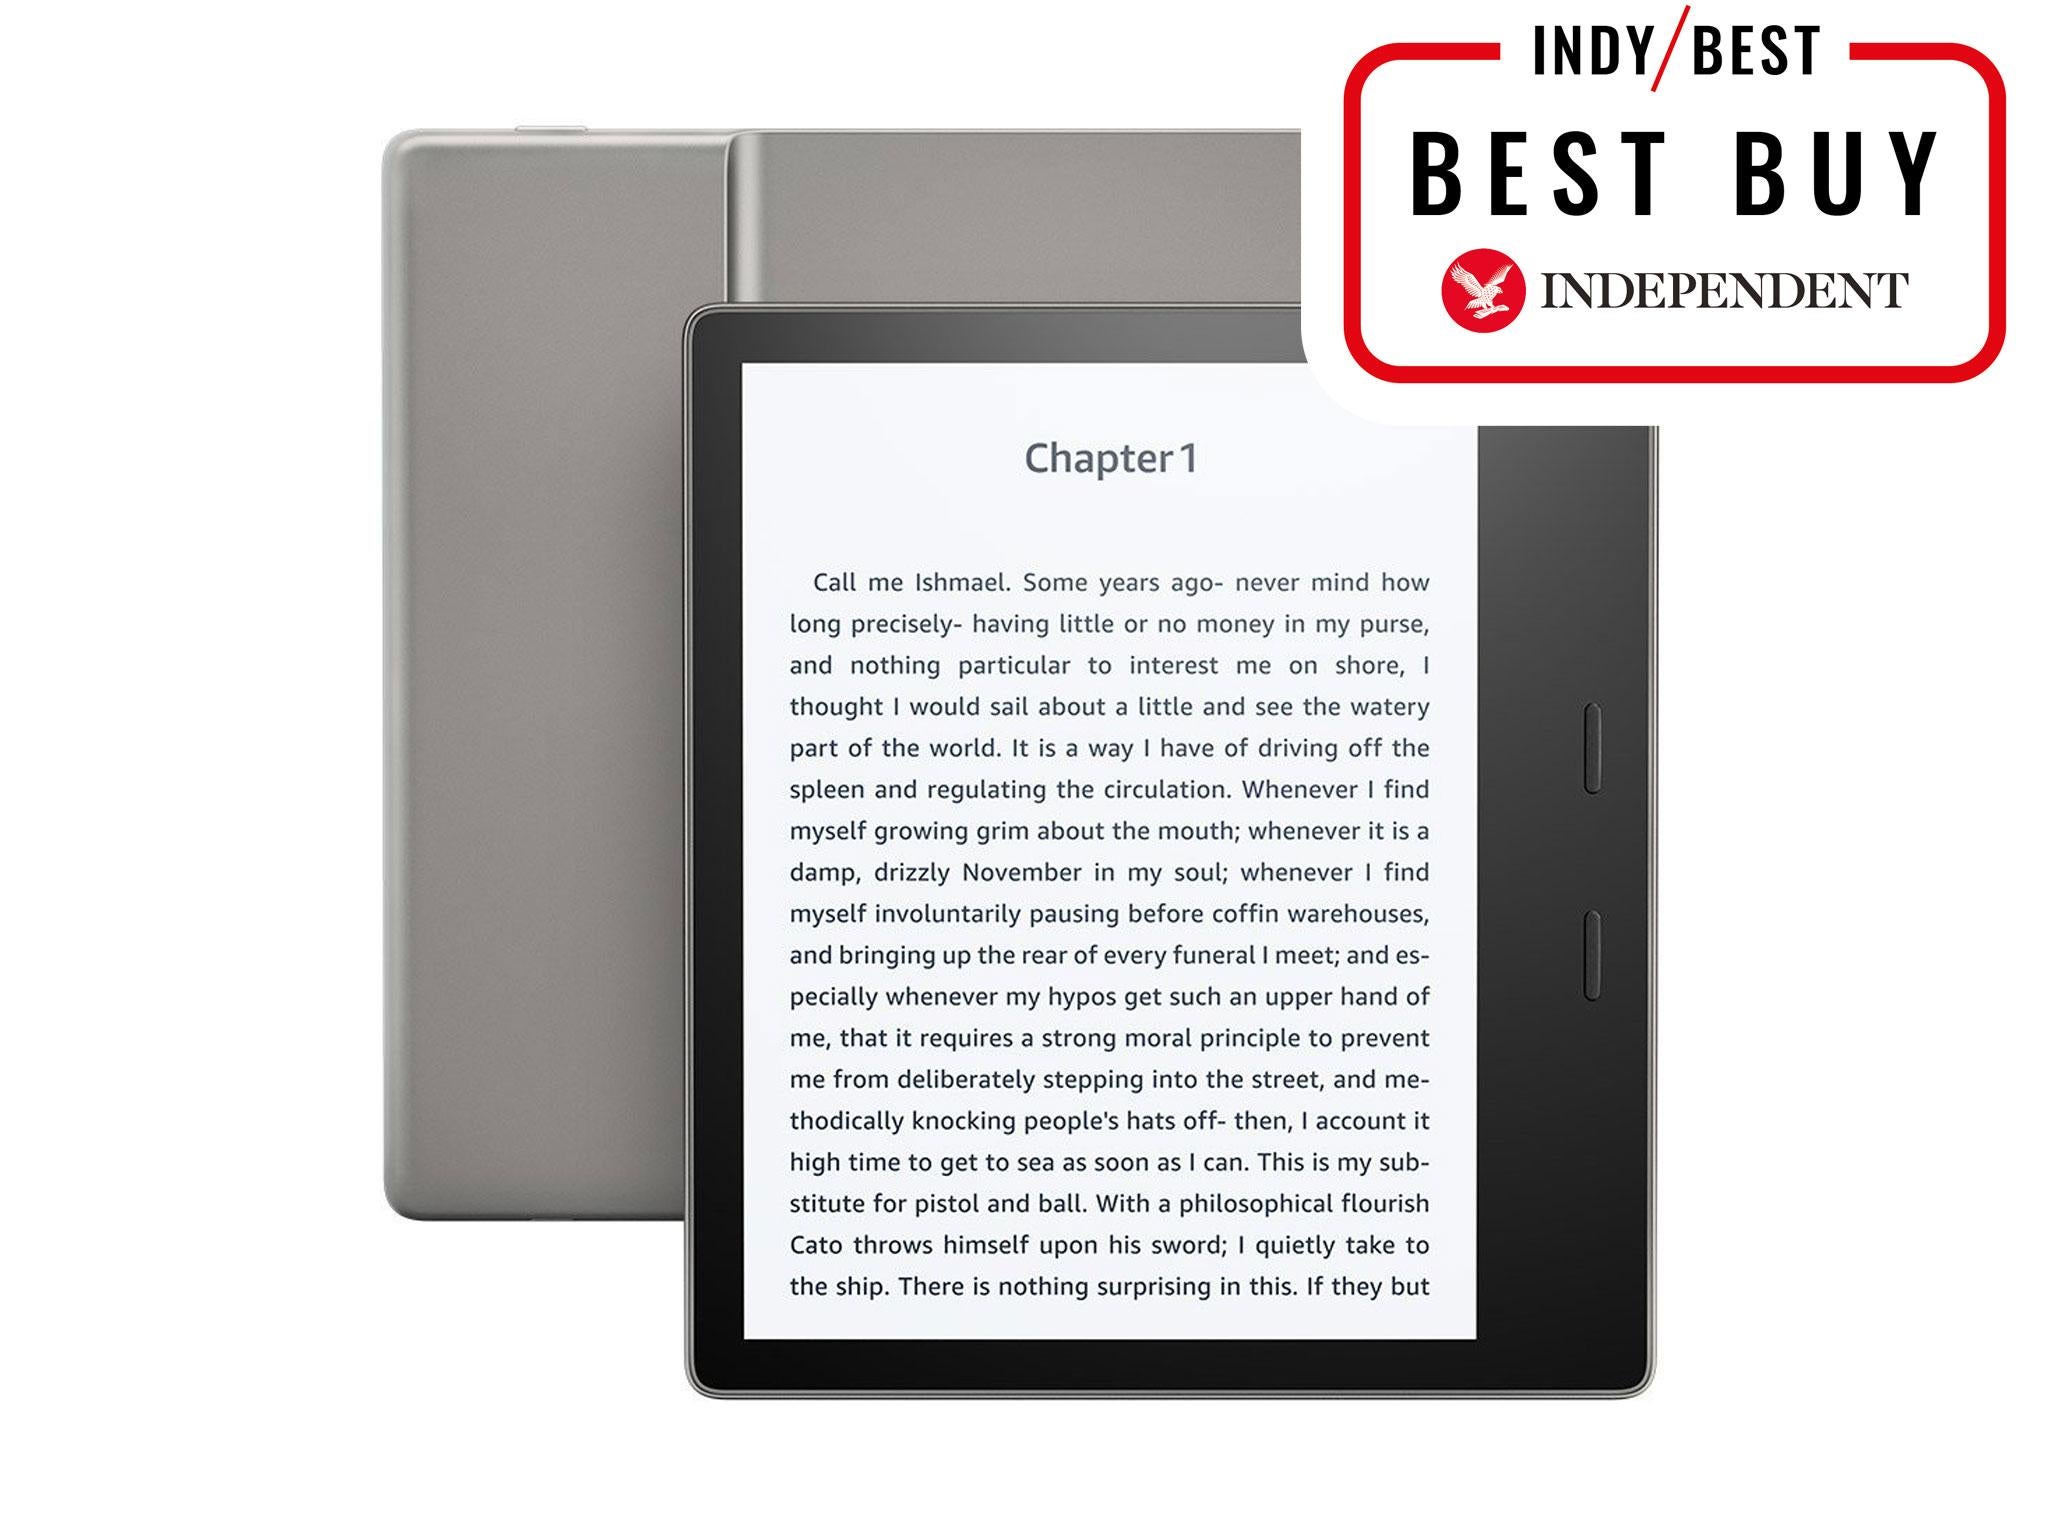 Forget the Kindle: World's first color e-reader with 7.8-inch display is  here